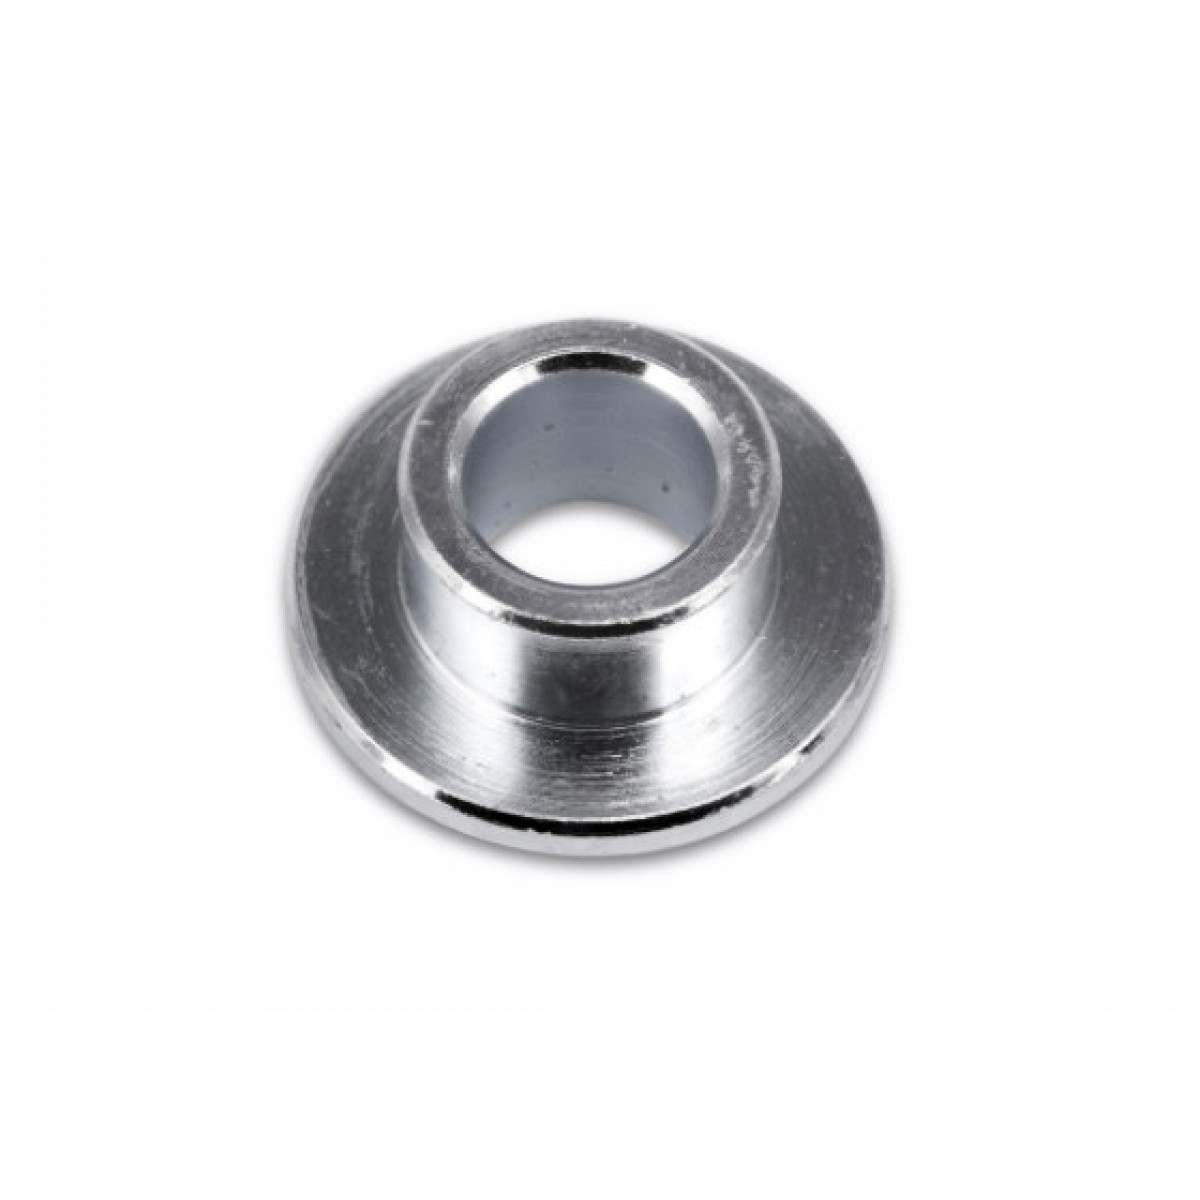 Picture of Birel spindle axle bushing M8